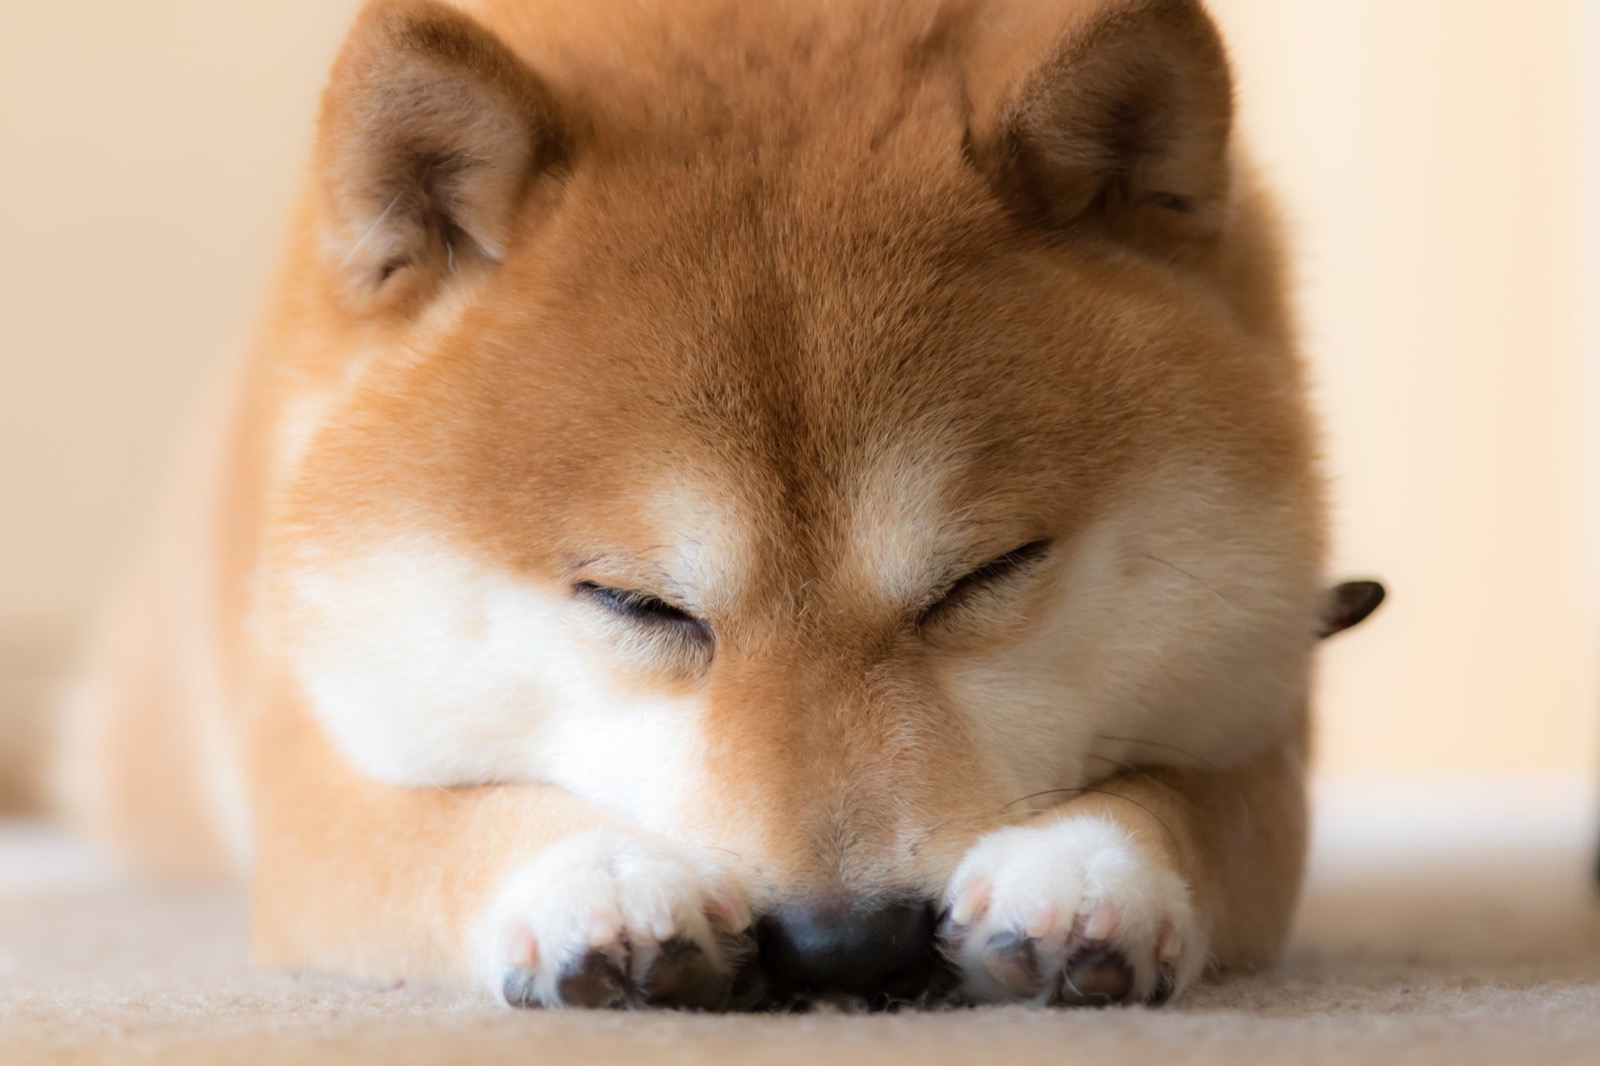 People With Exceptionally High IQ Will Find This 20-Question Mixed Knowledge Test Exceptionally Easy Sleeping Shiba Inu Dog Pet